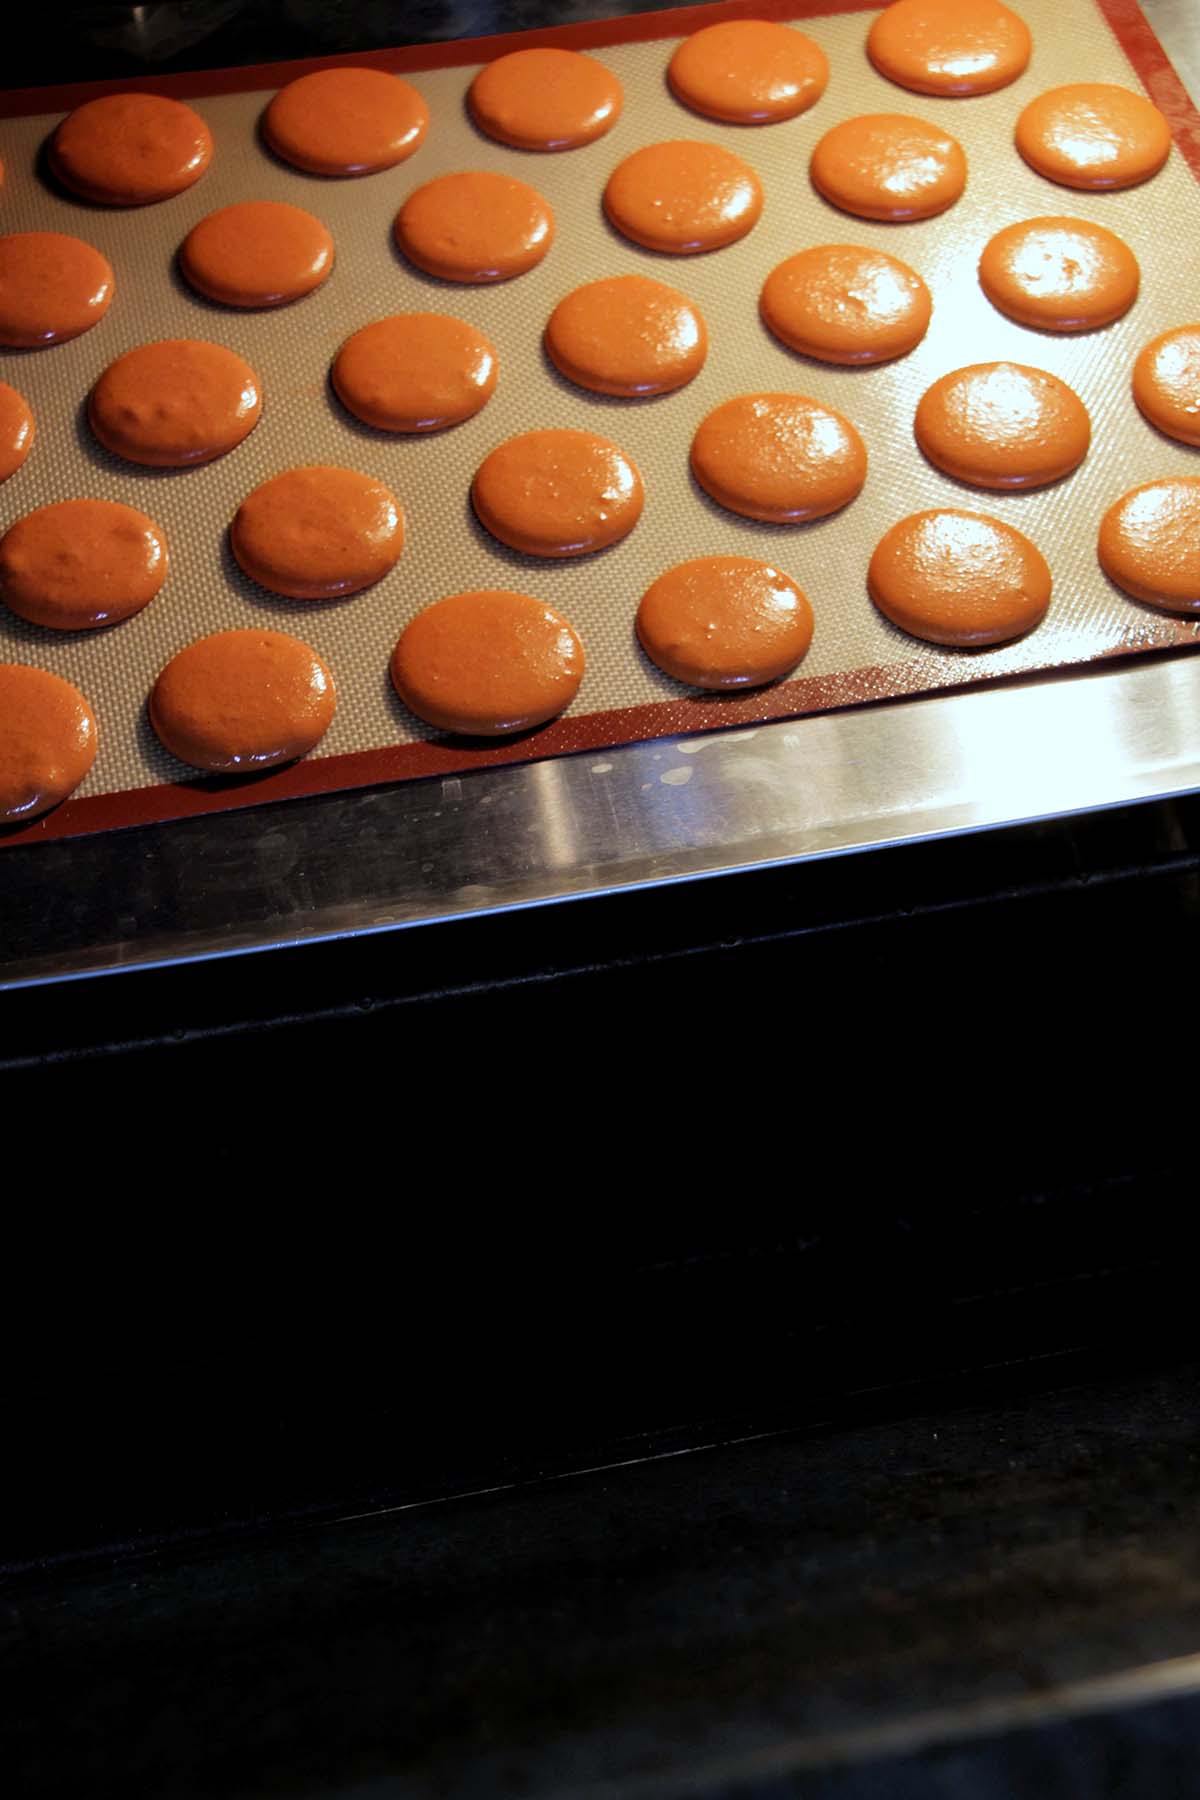 baking no rest macarons on an AirBake tray.